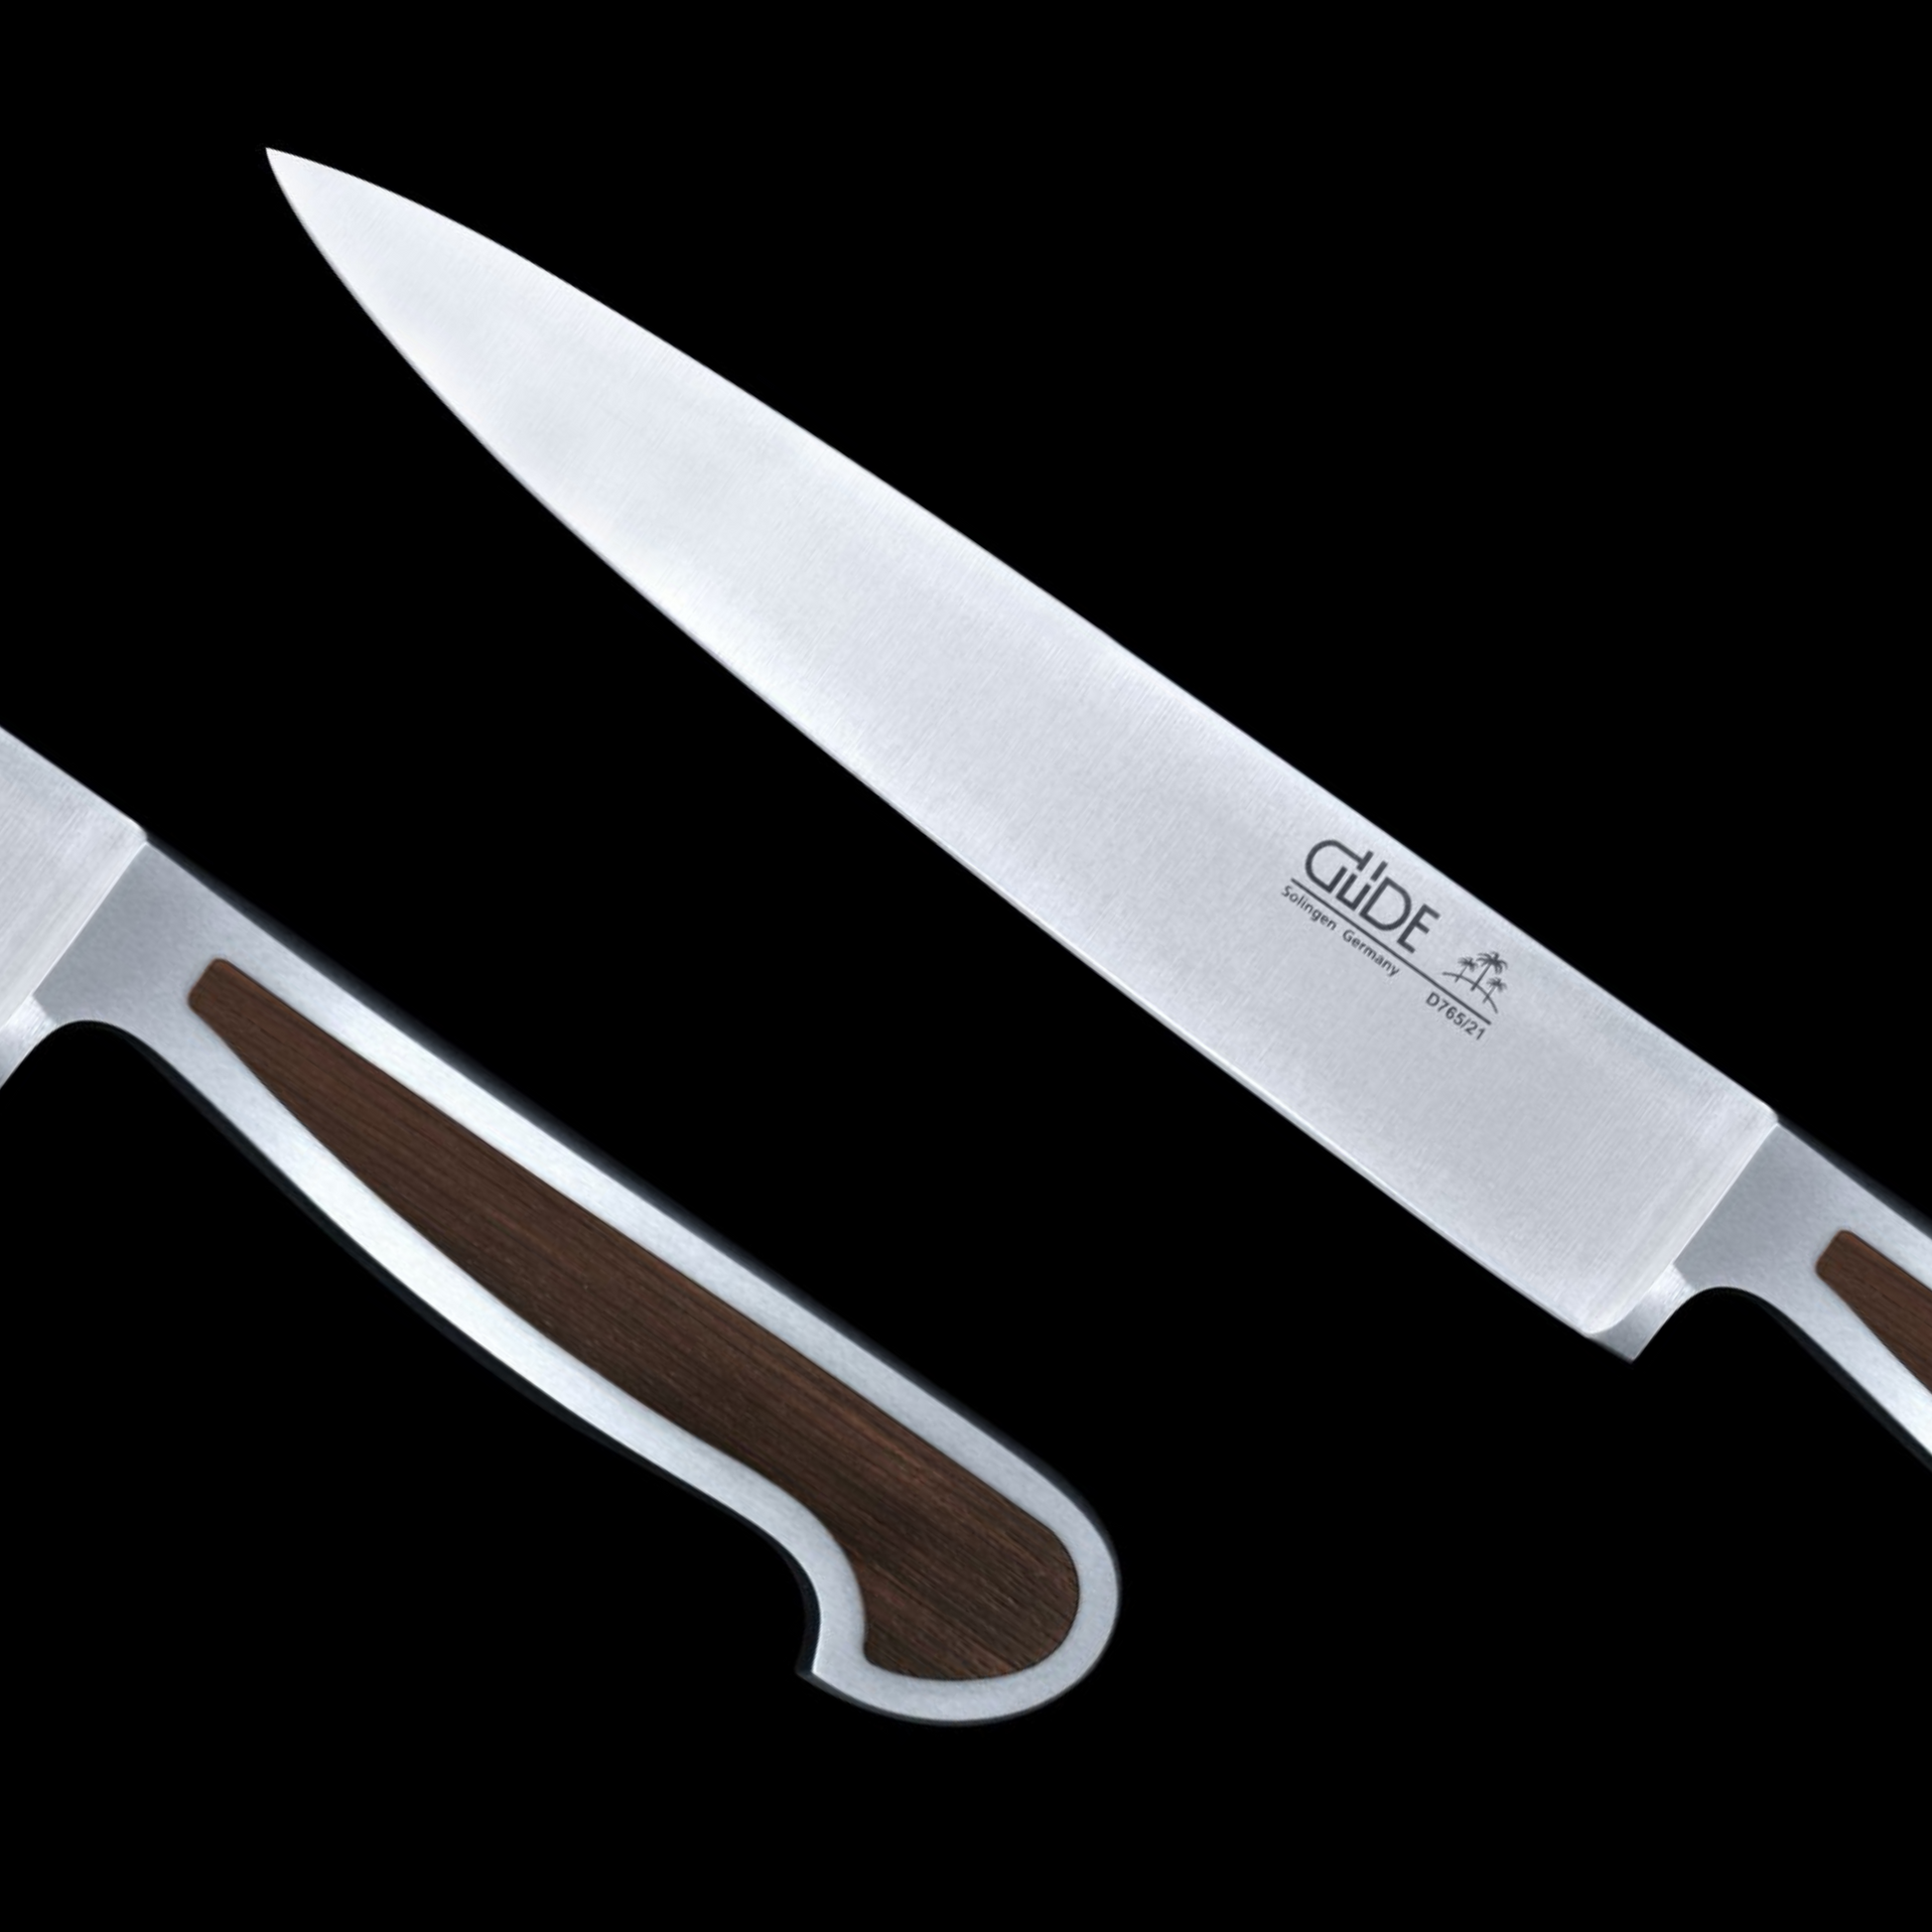 Gude Delta Series Forged Double bolster Slicing Knife 8", African Black Wood Handle - GuedeUSA